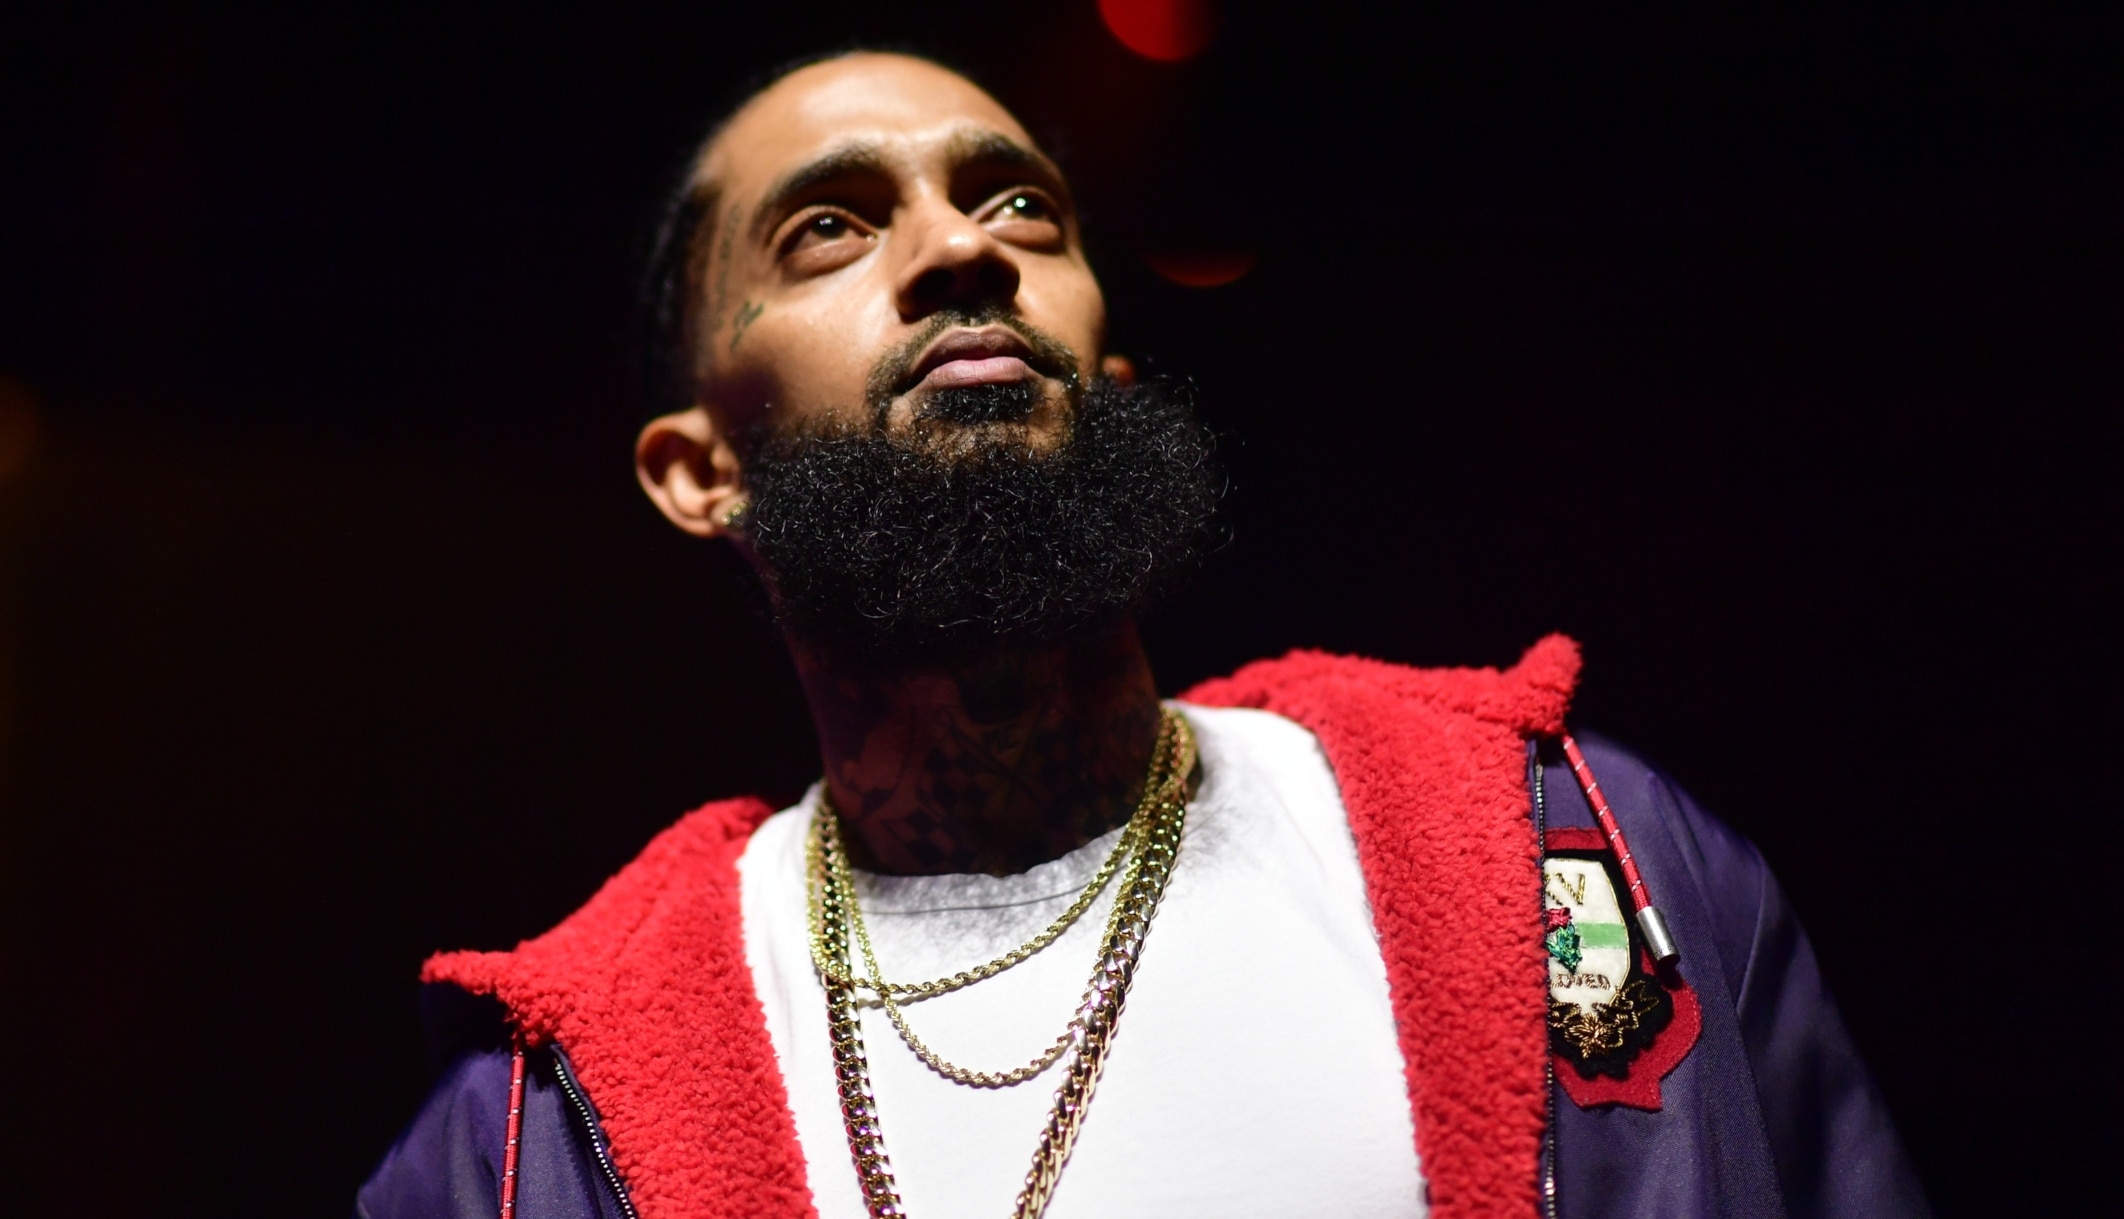 Nipsey Hussle pictured at an Atlanta event in 2018